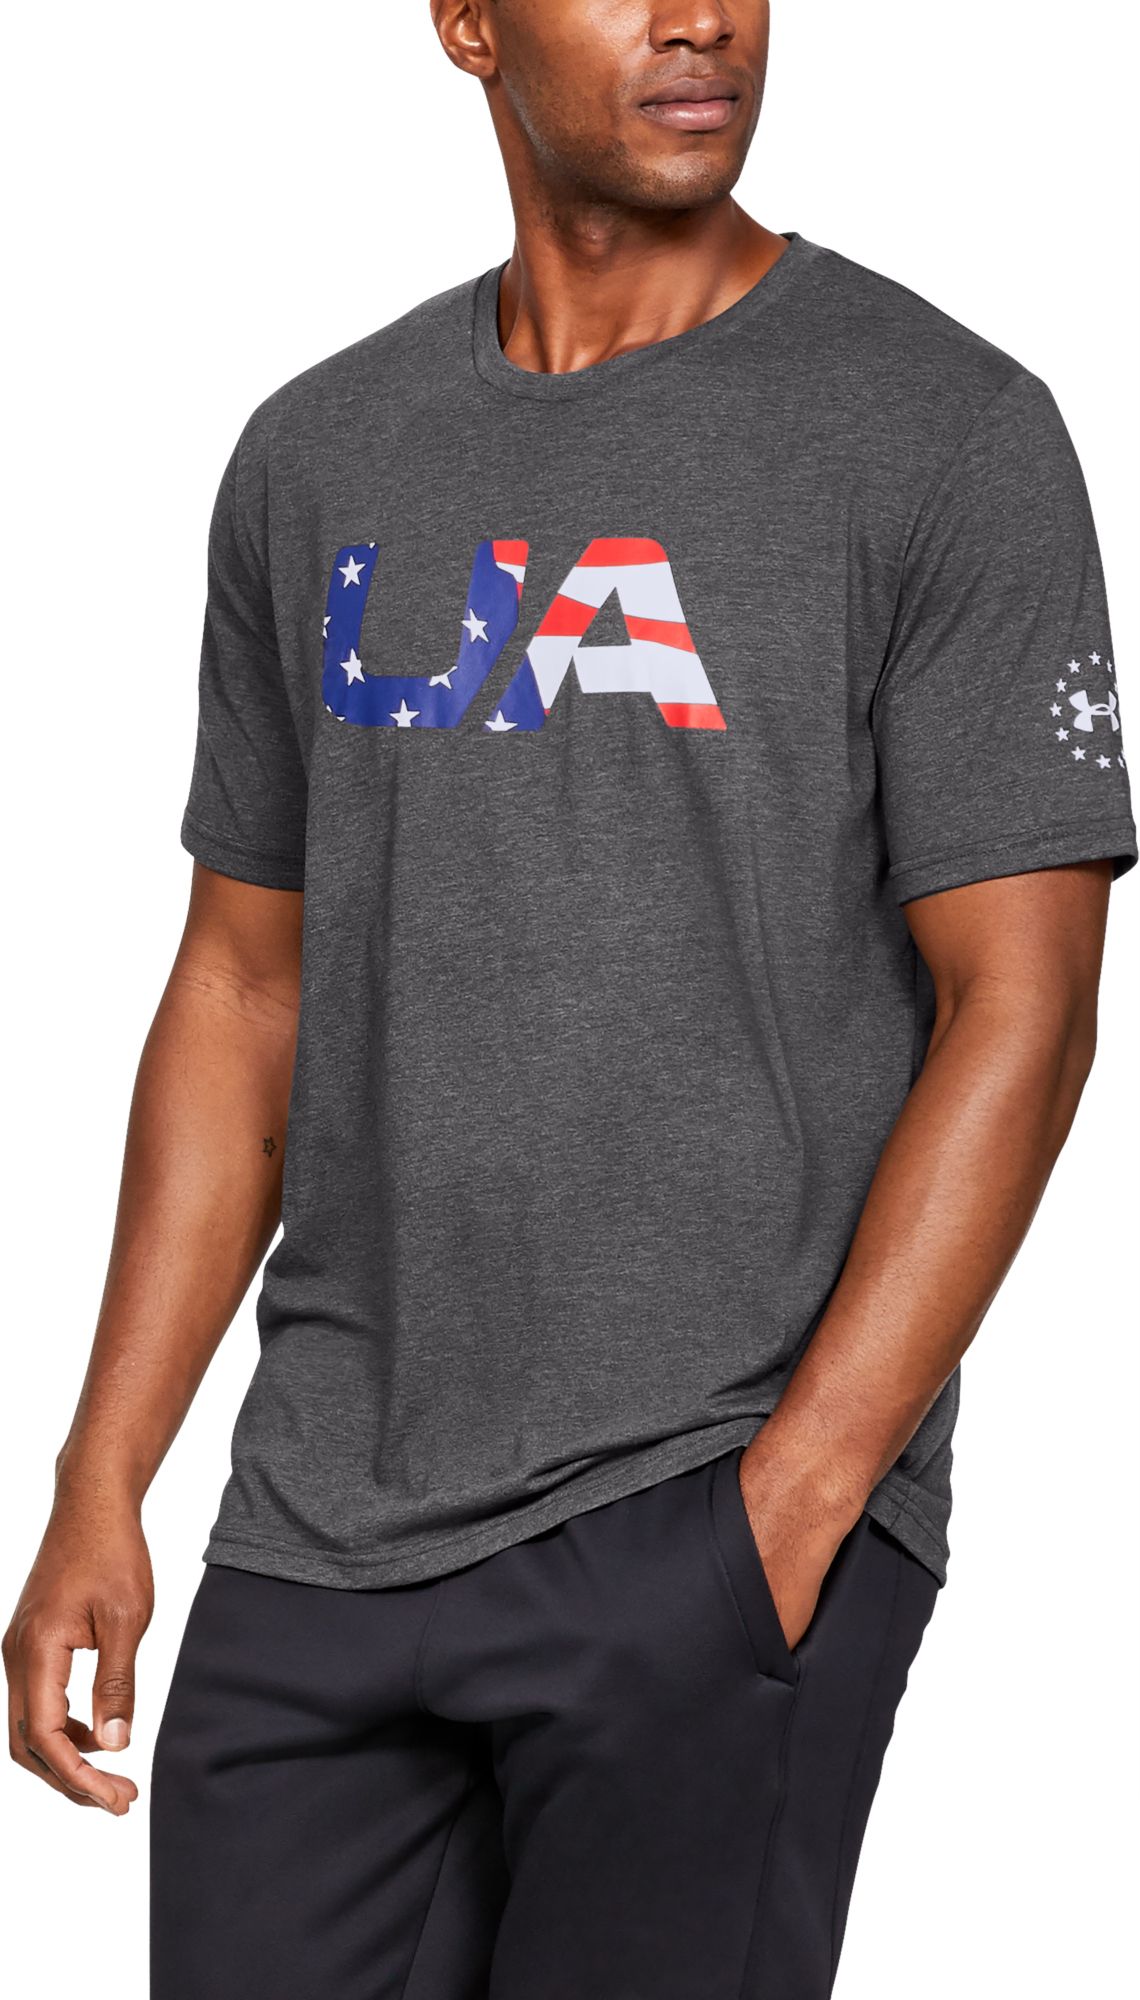 under armour graphic t shirts